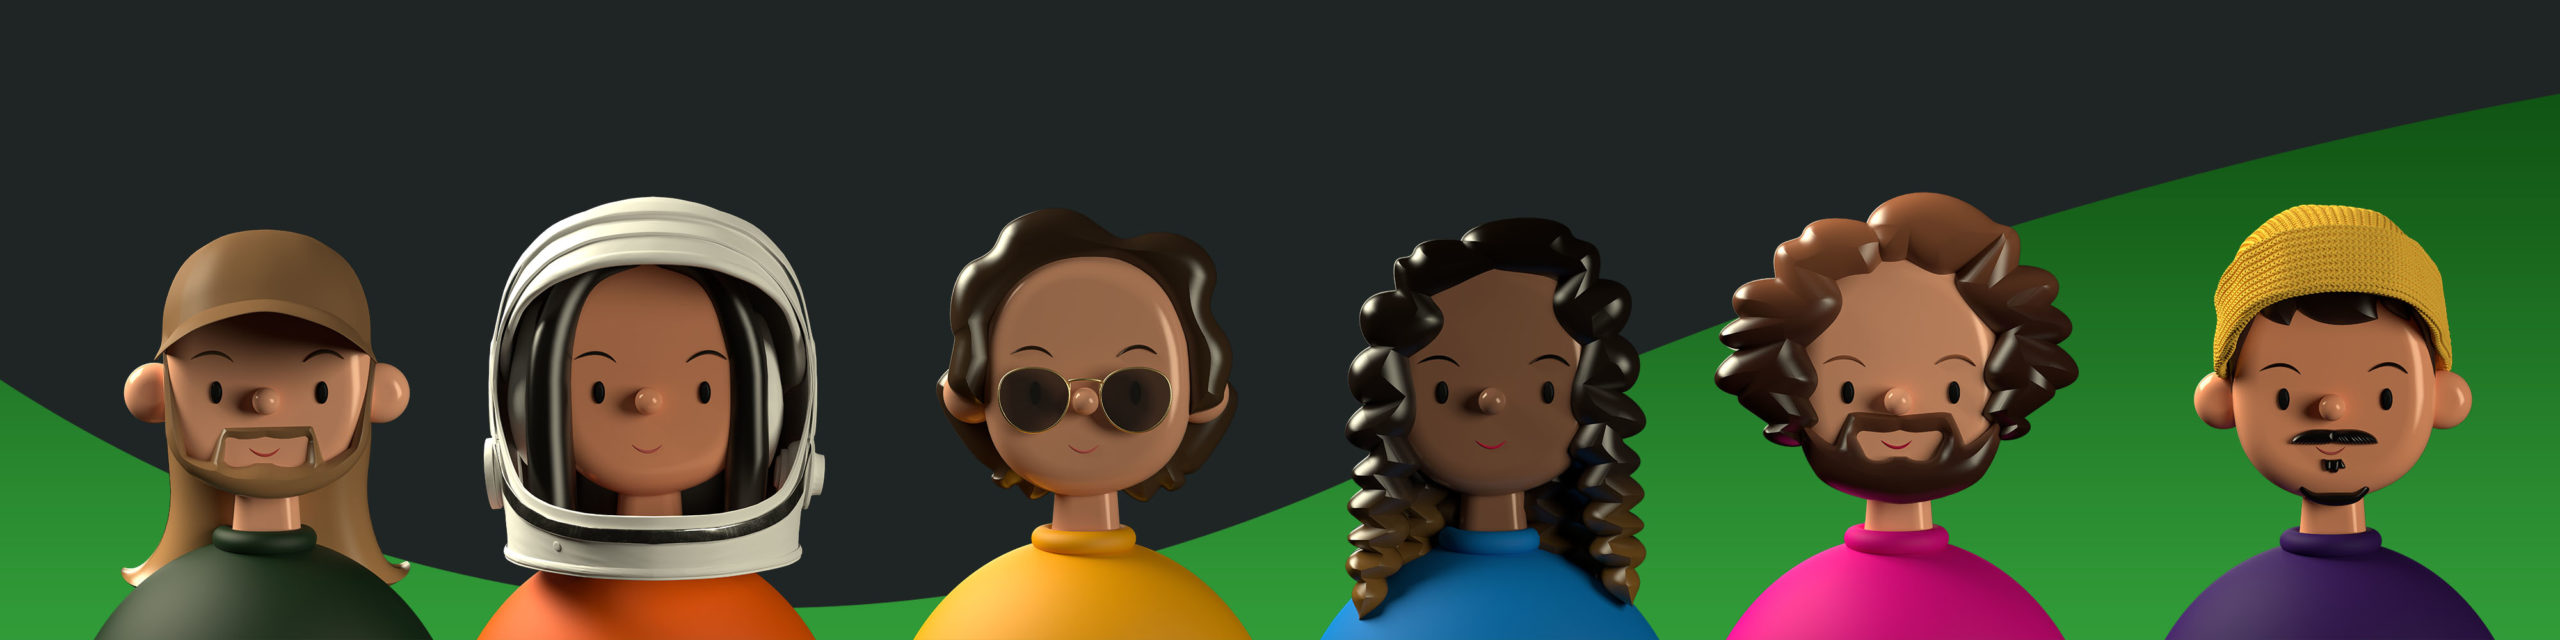 EazeGames Introduces 3D Avatars To Optimize Player Experience